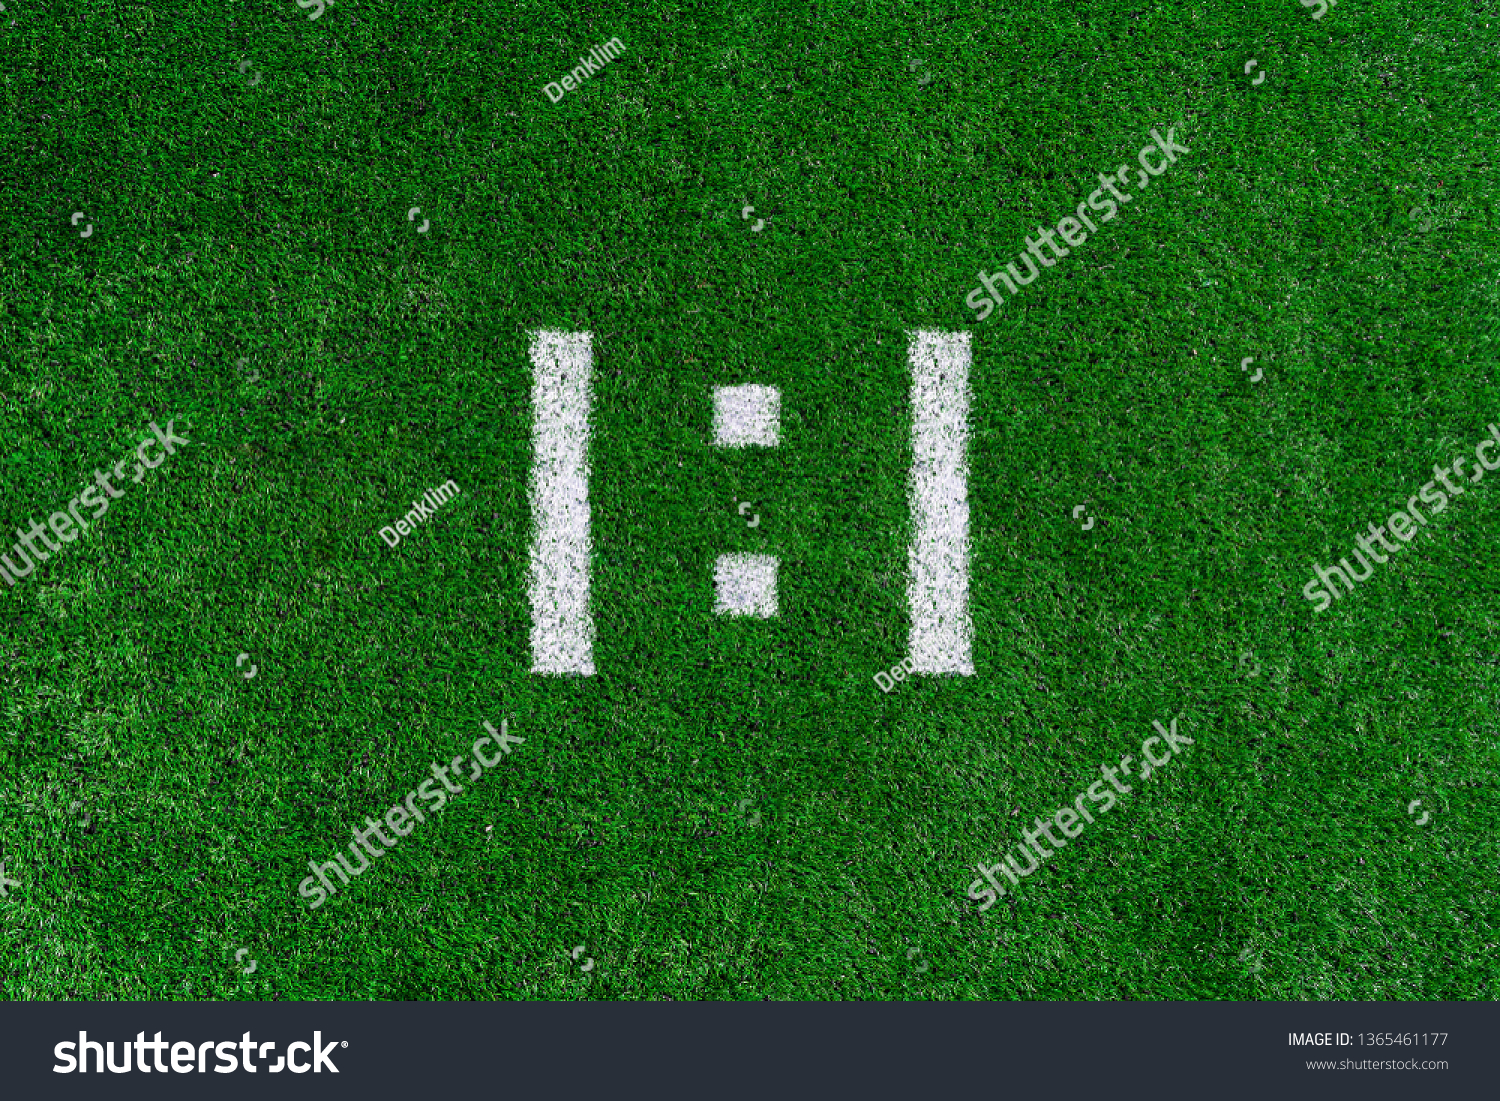 Football score 1:1.White numbers one and one are drawn on the green grass #1365461177